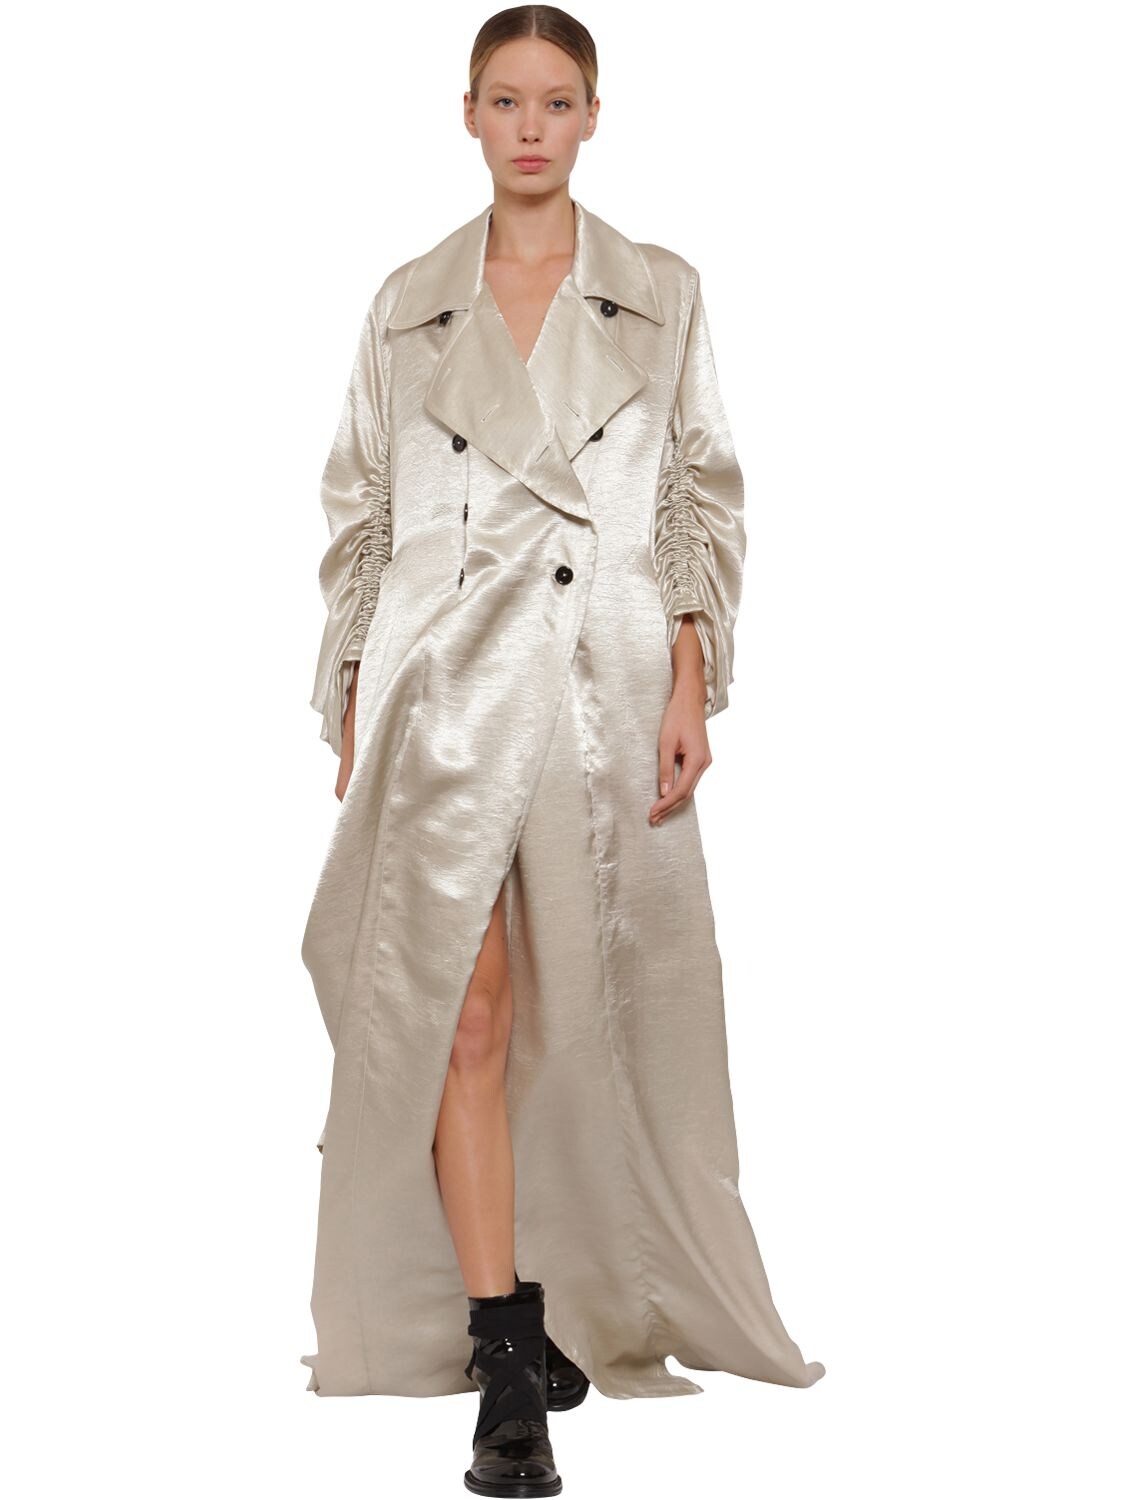 ANN DEMEULEMEESTER LONG DOUBLE BREASTED SATIN TRENCH COAT,69I019010-MDCW0